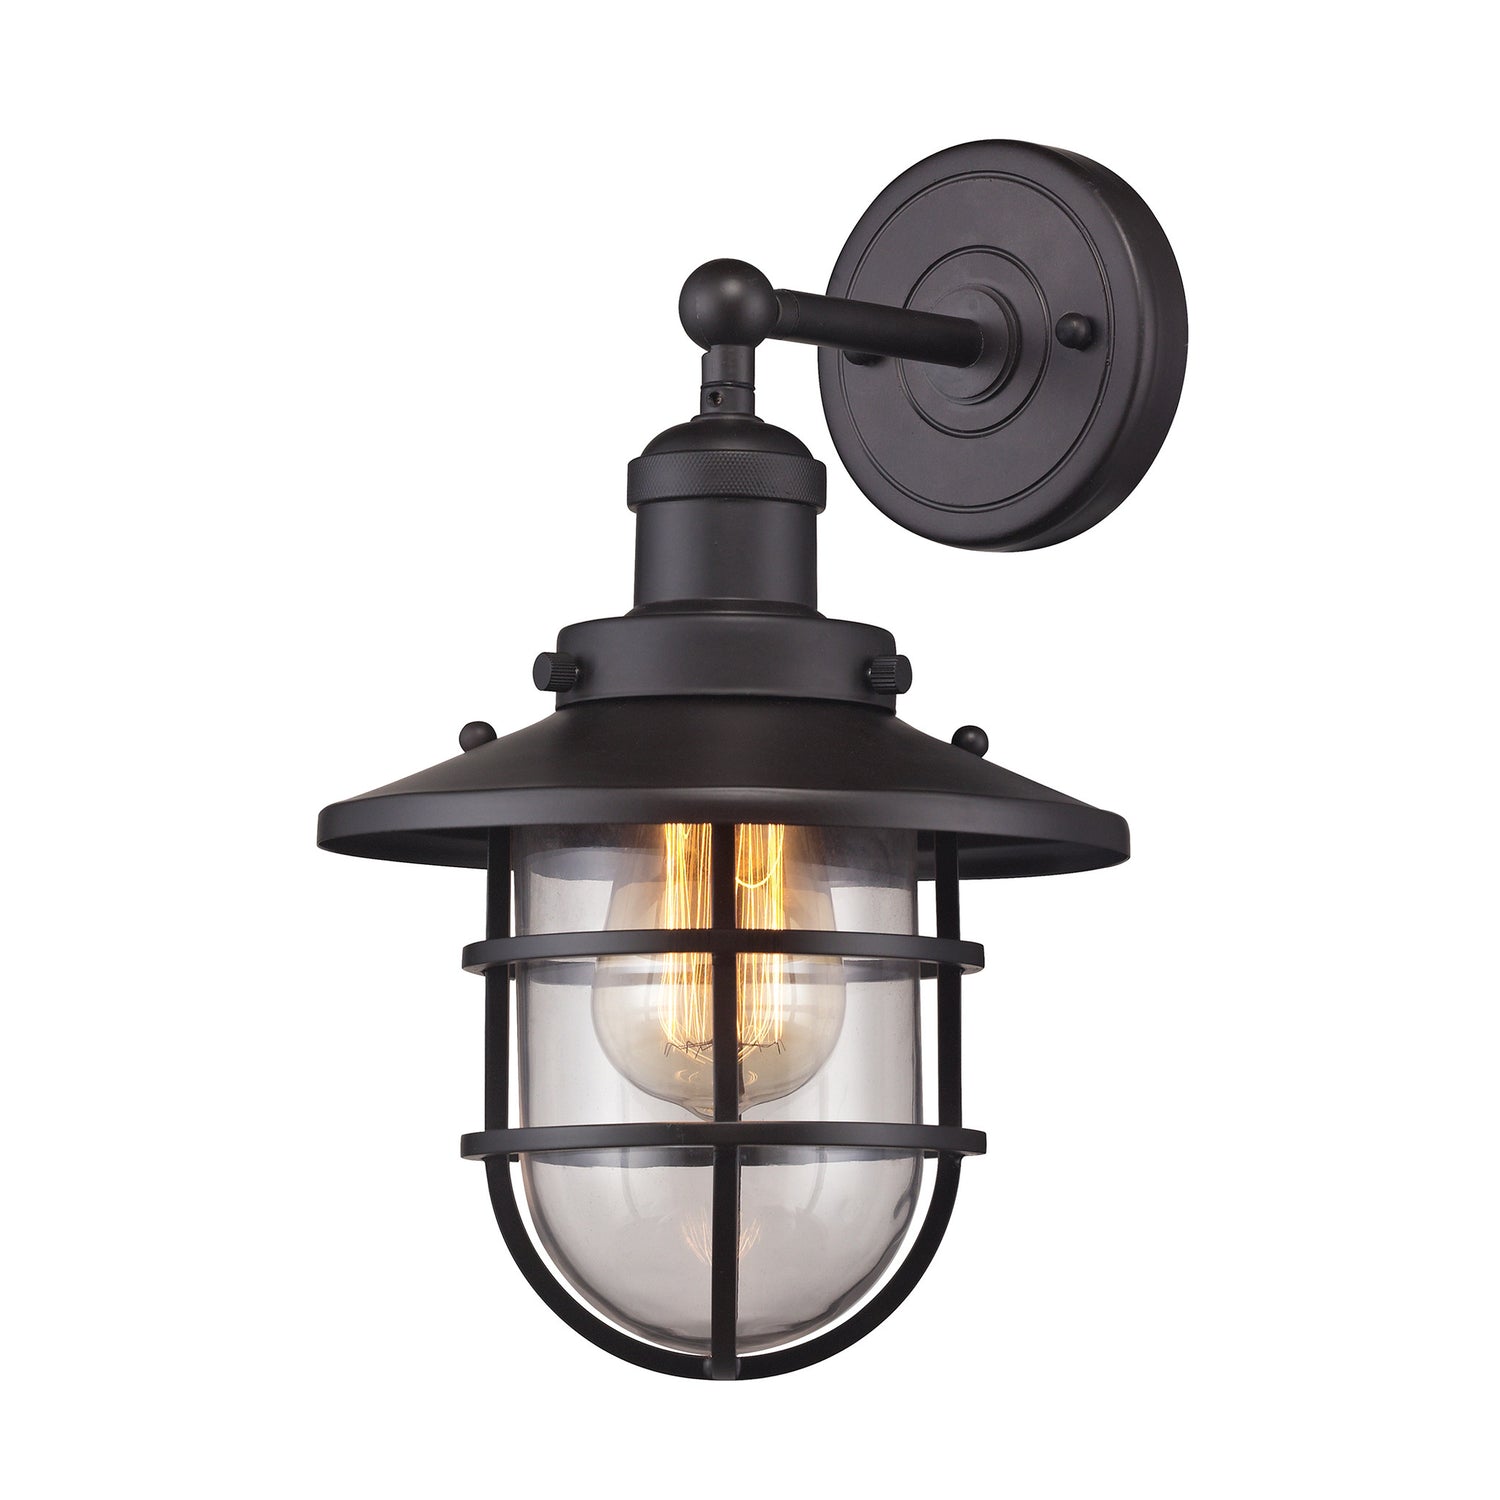 Seaport 1 Light Wall Sconce in Oil Rubbed Bronze by Elk Lighting 66366-1